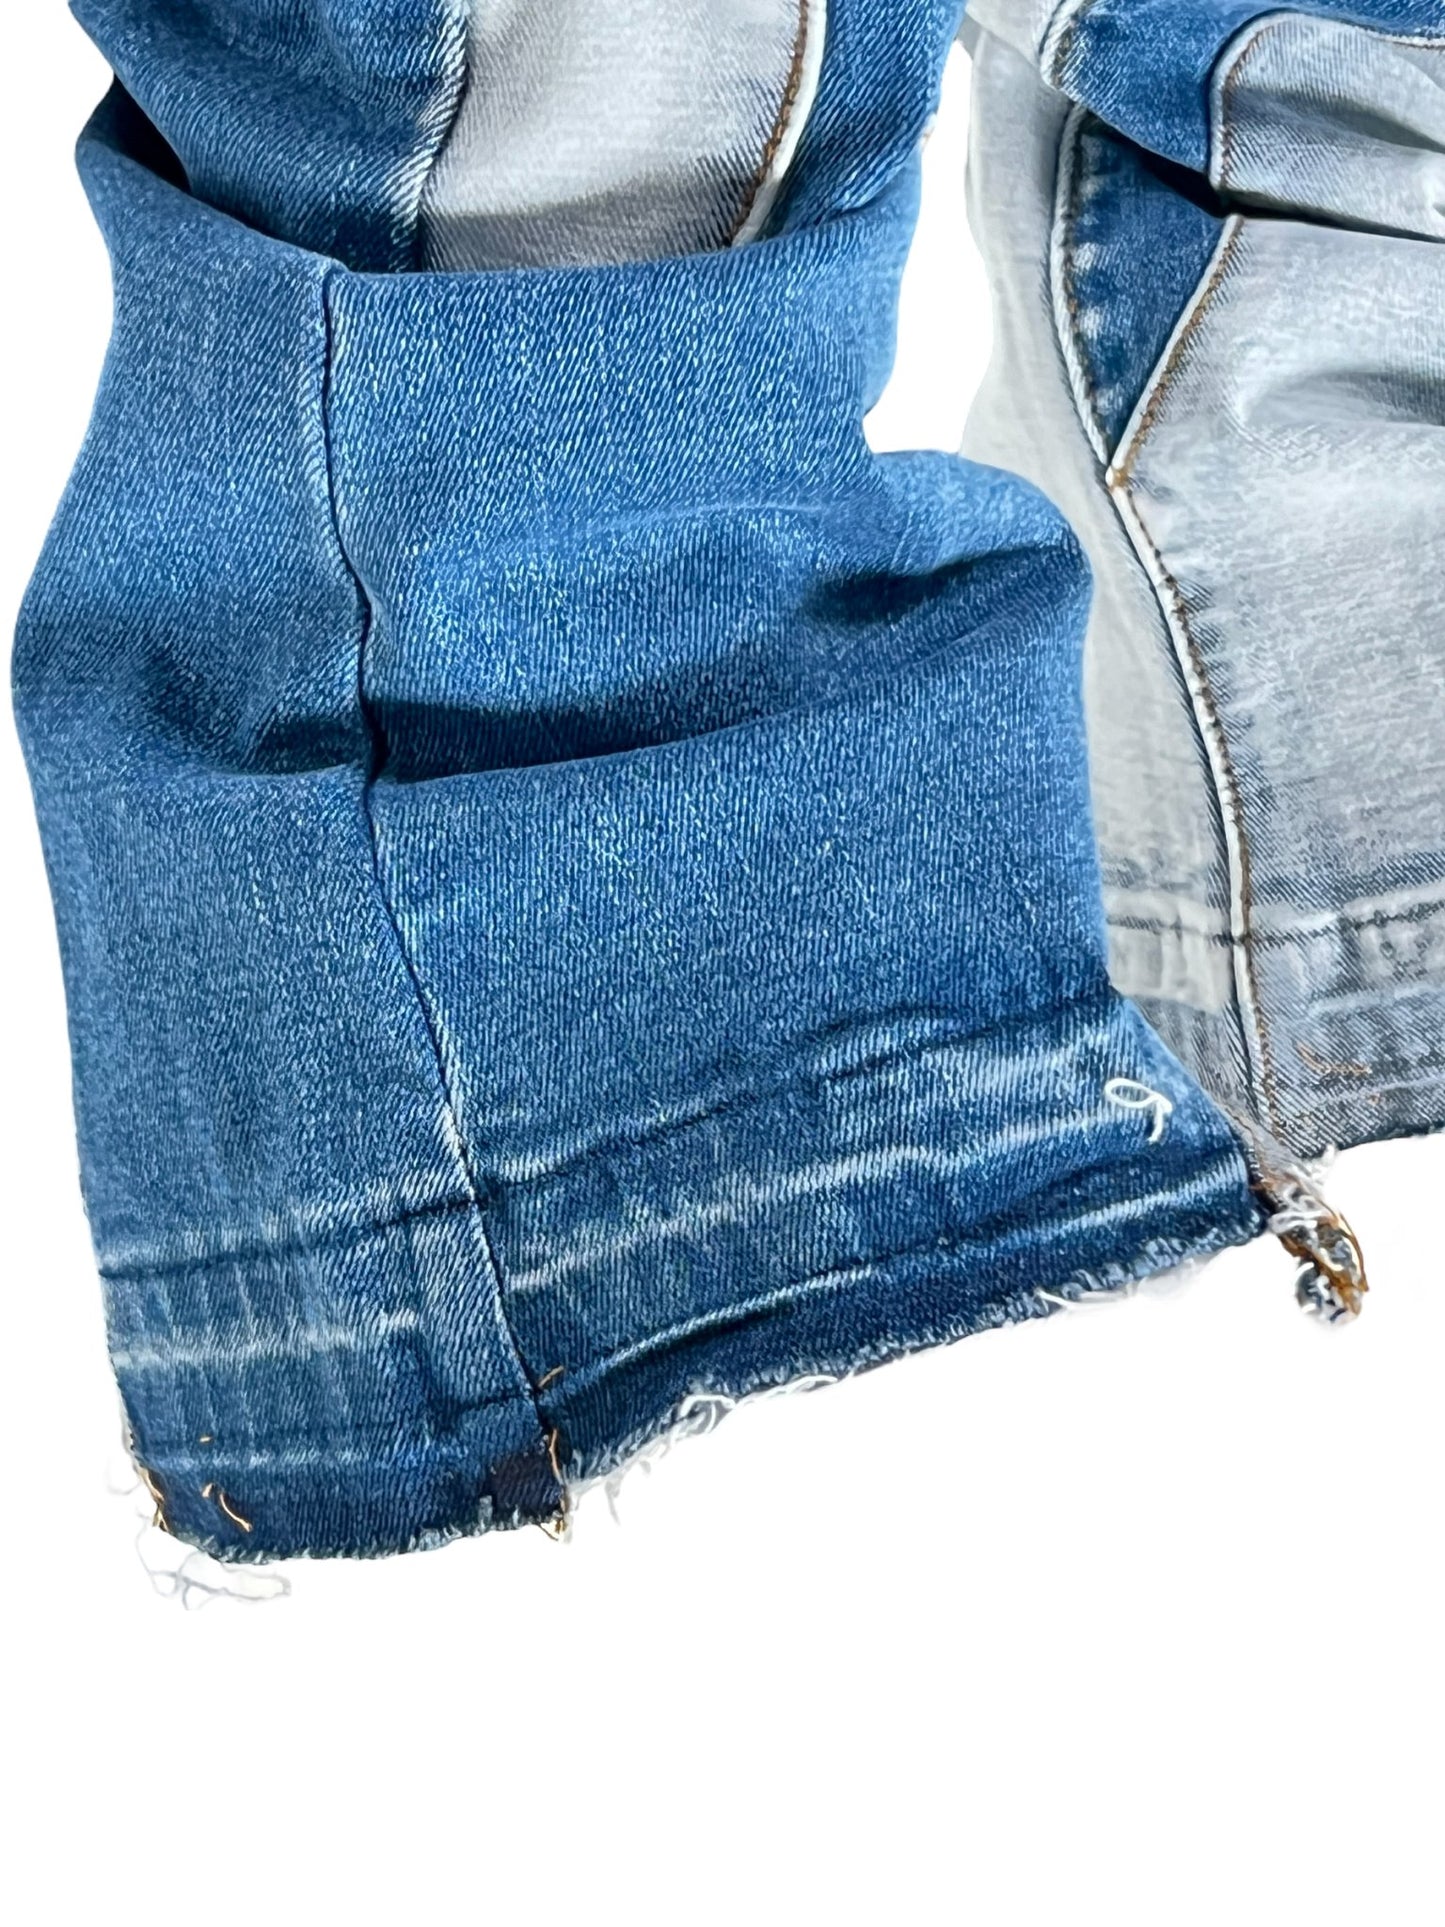 Close-up of GUAPI VINTAGE BLUE WAVY DENIM fabric with a focus on texture and detail by GUAPI.